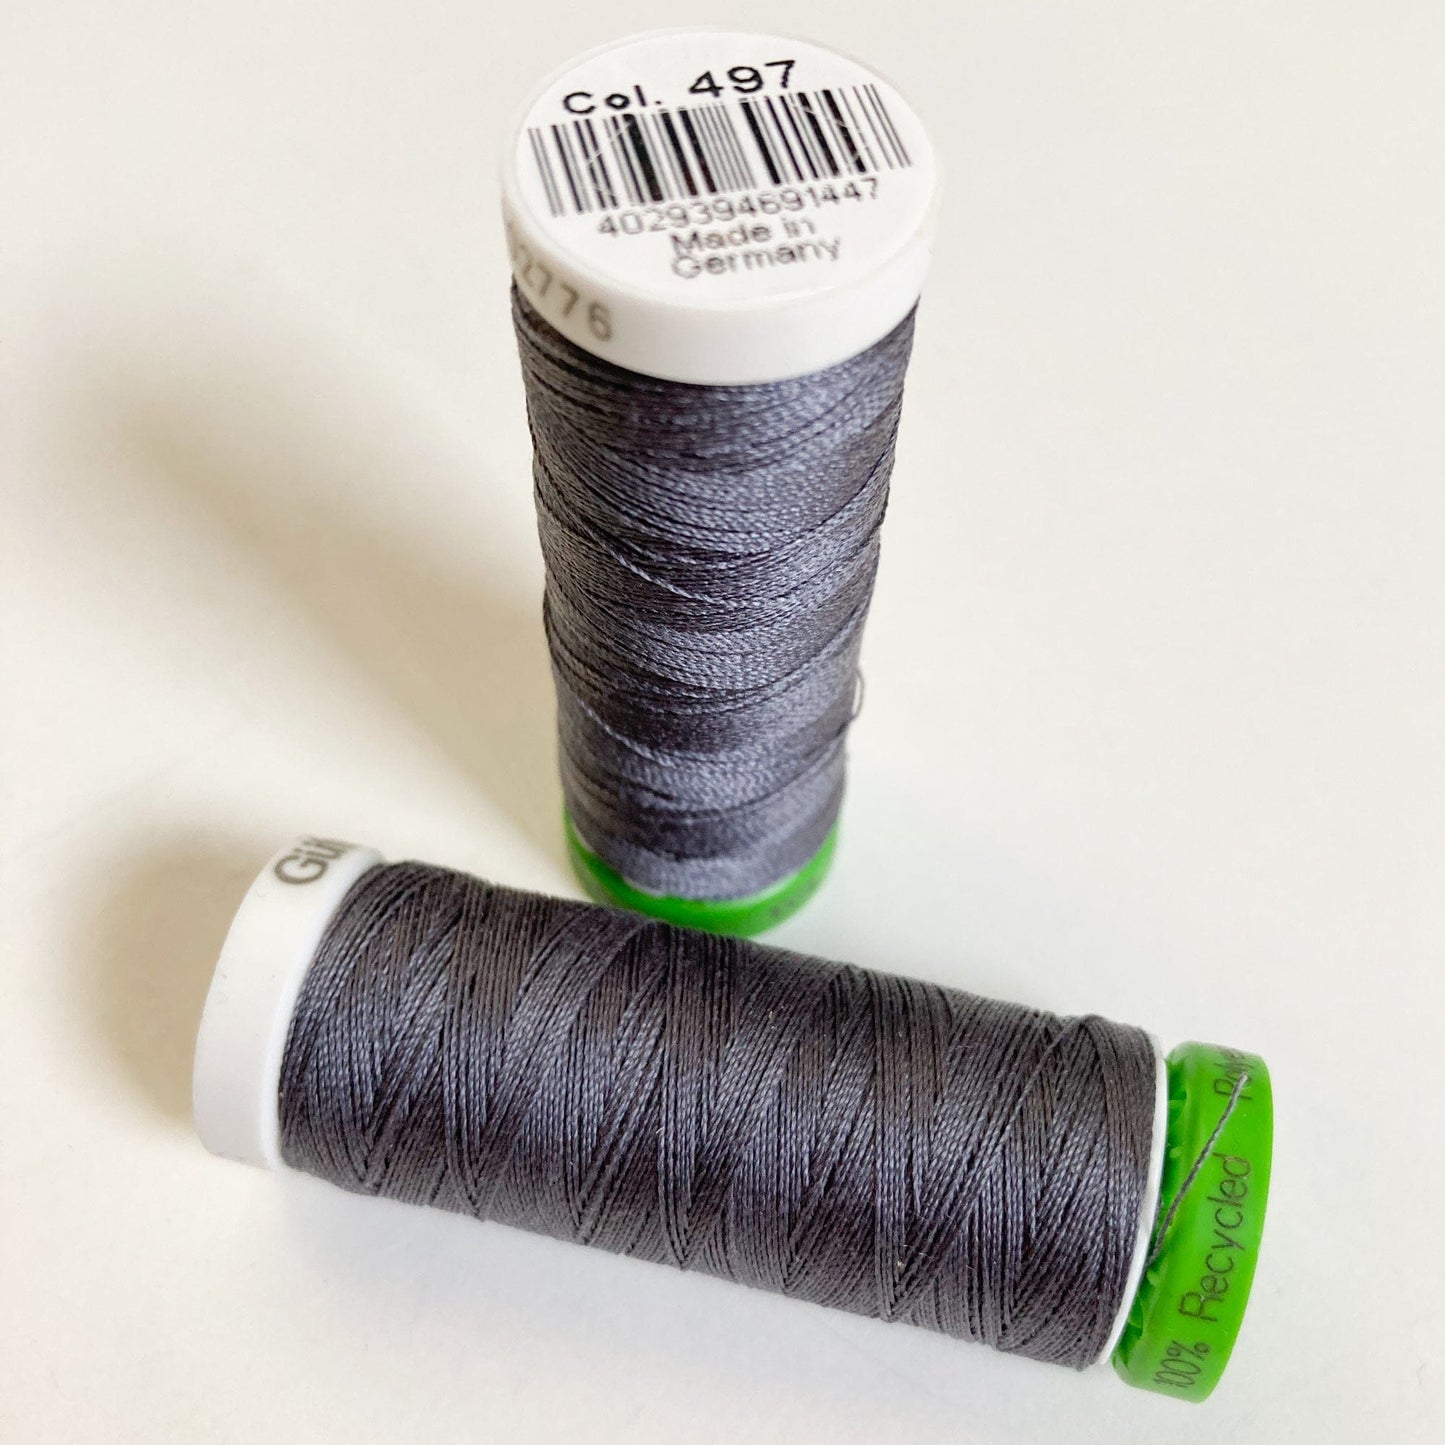 100 m Reel Gütermann Recycled Sew-All Thread in Grey, no. 497